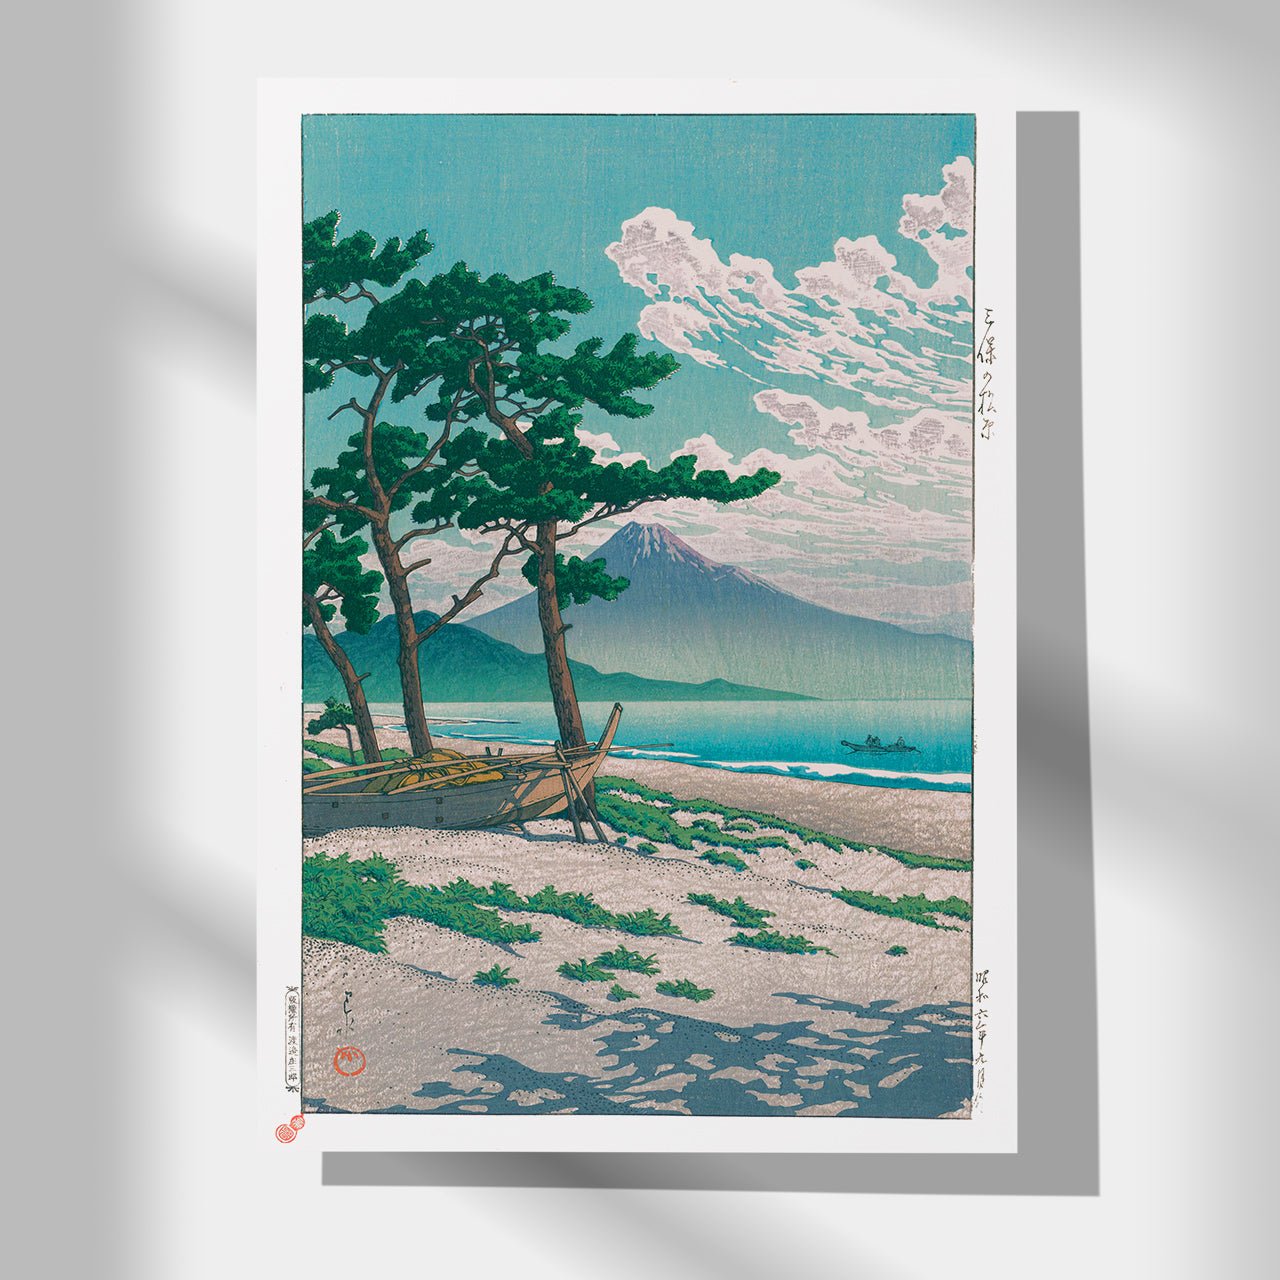 Japanese Art Poster by Kawase Hasui - Serene beach with pine trees and majestic mountain in the background